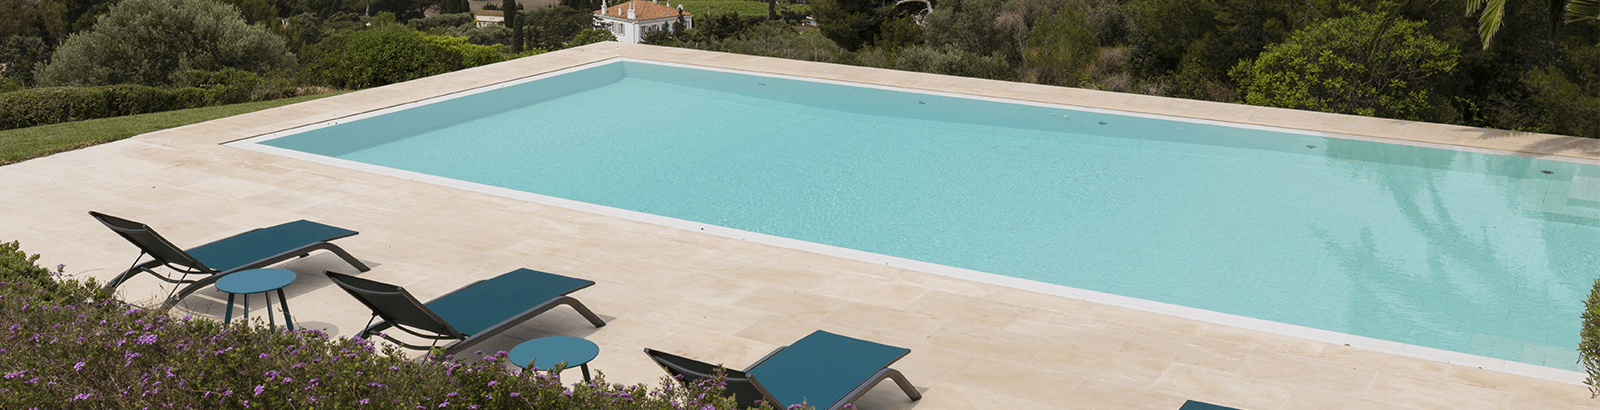 Developing your poolside area